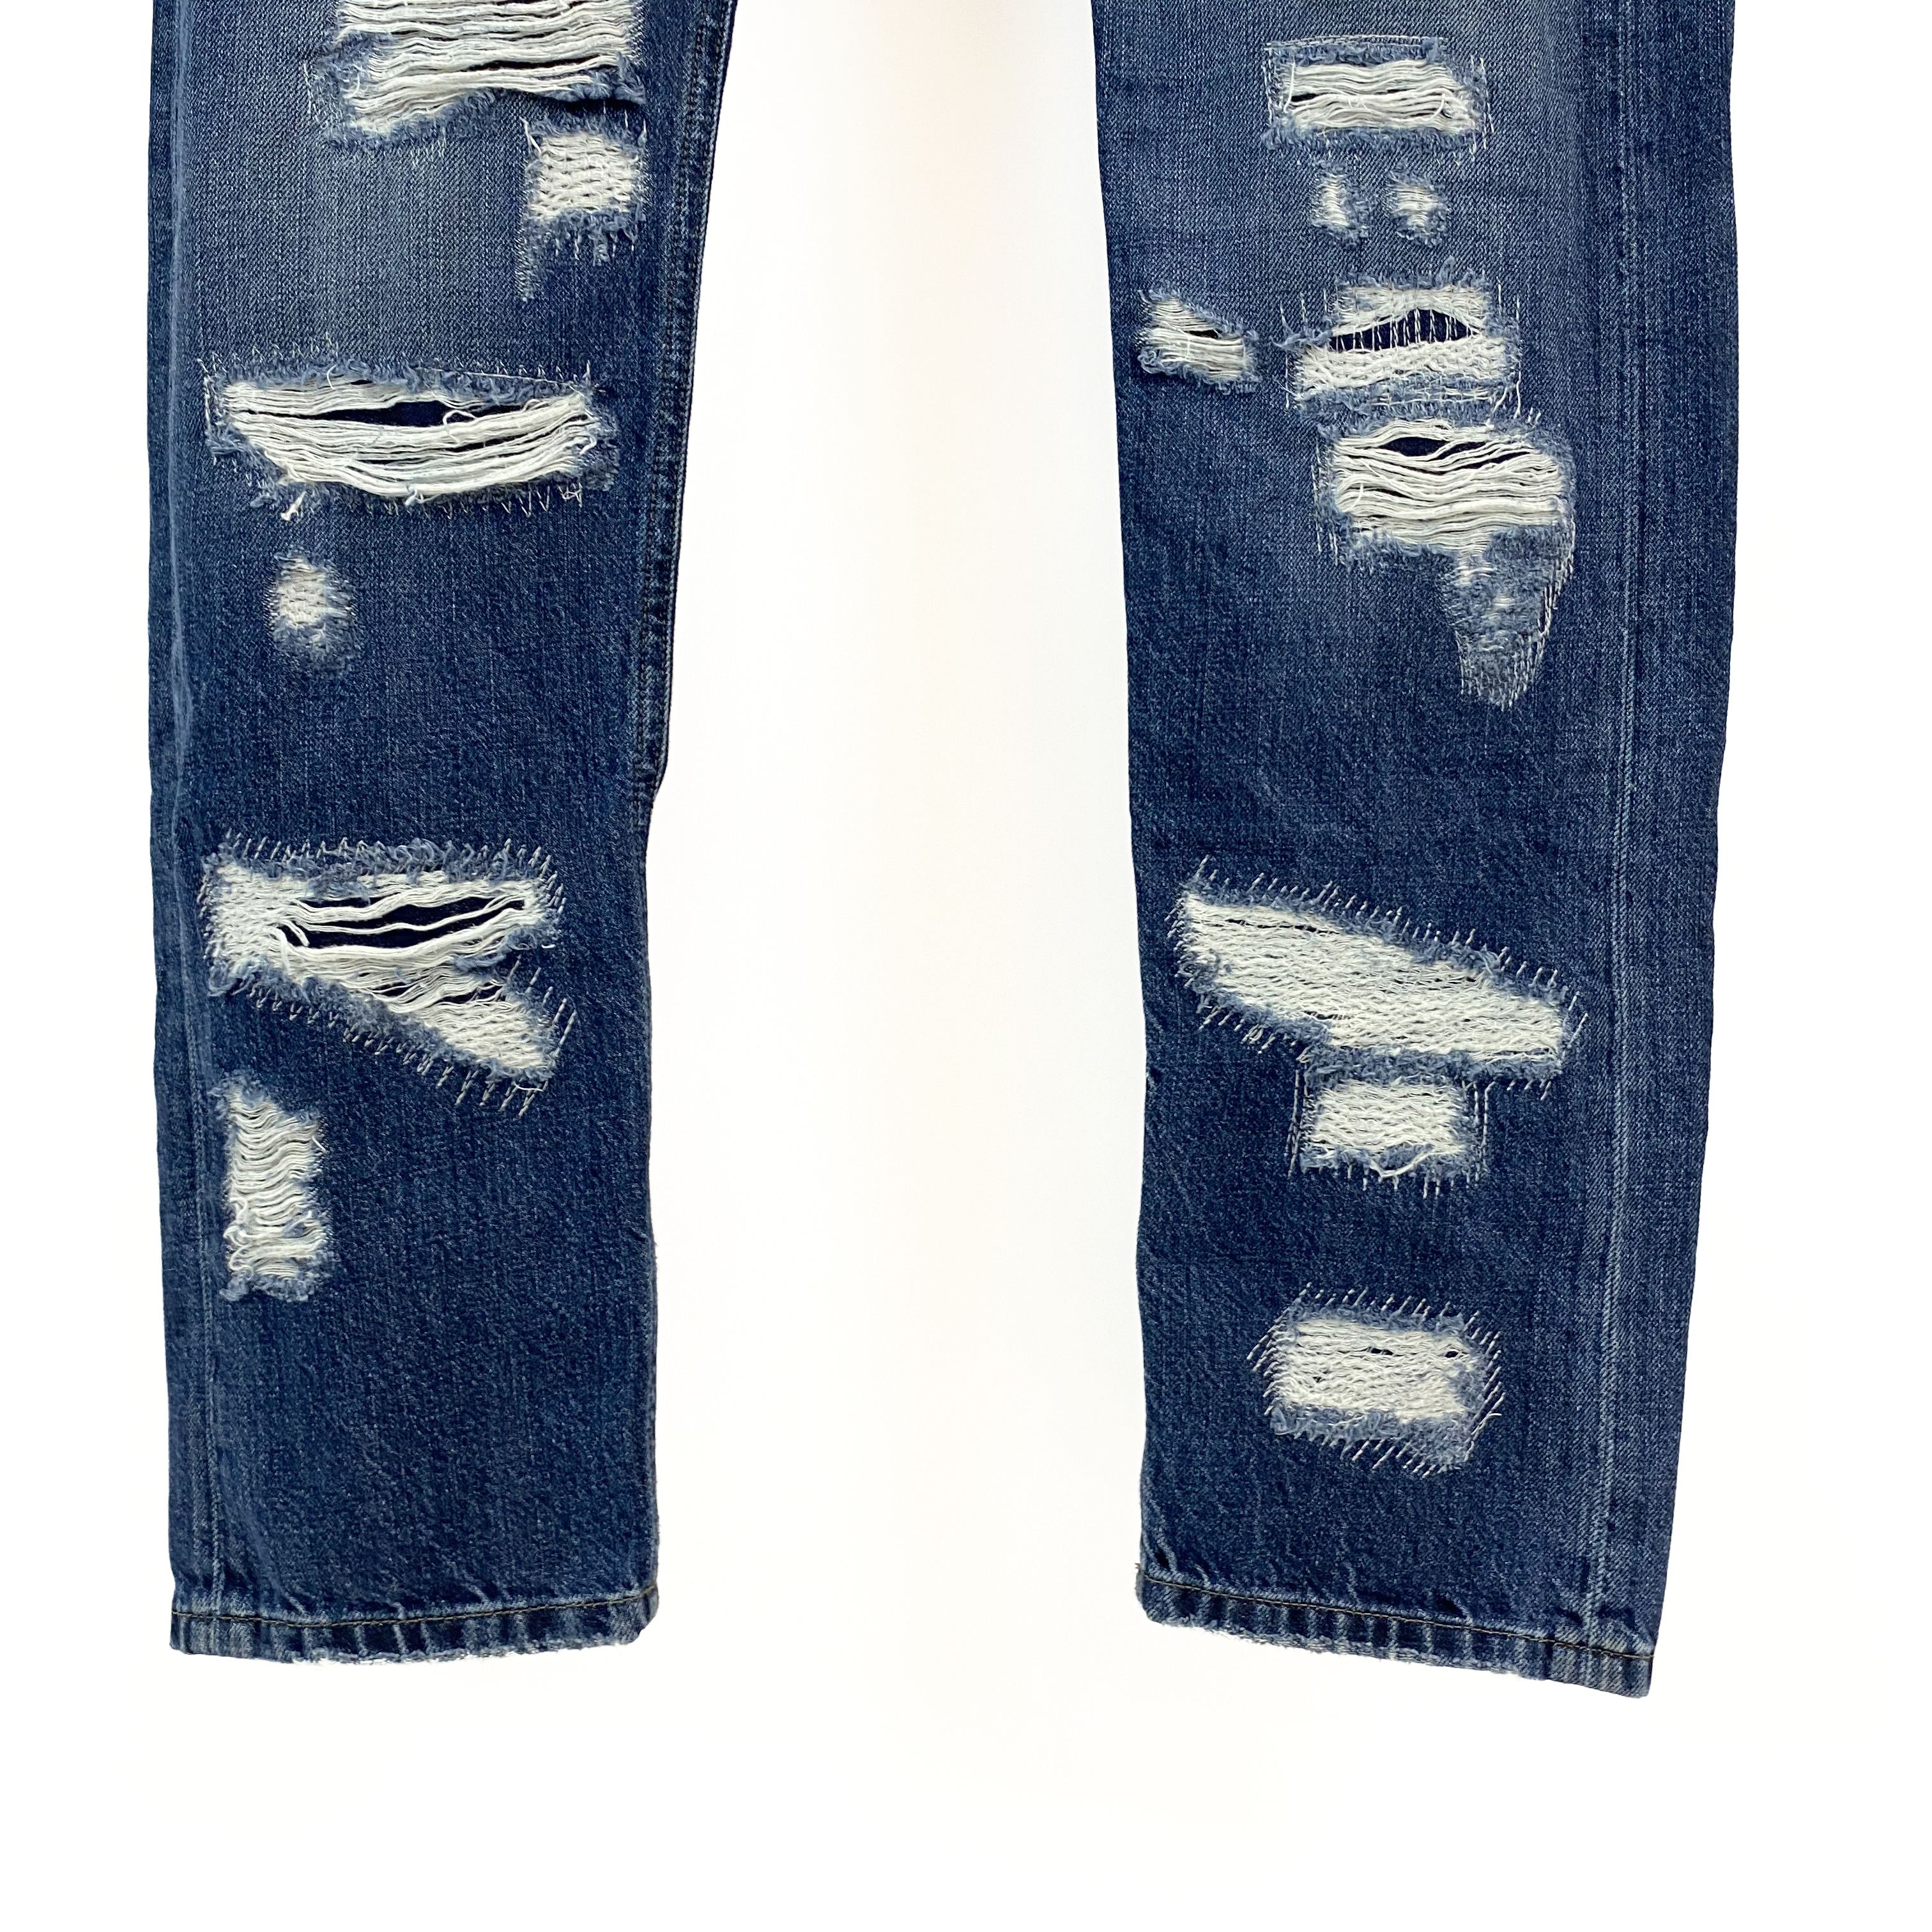 Dolce & Gabbana Men's Distressed/Ripped Jeans